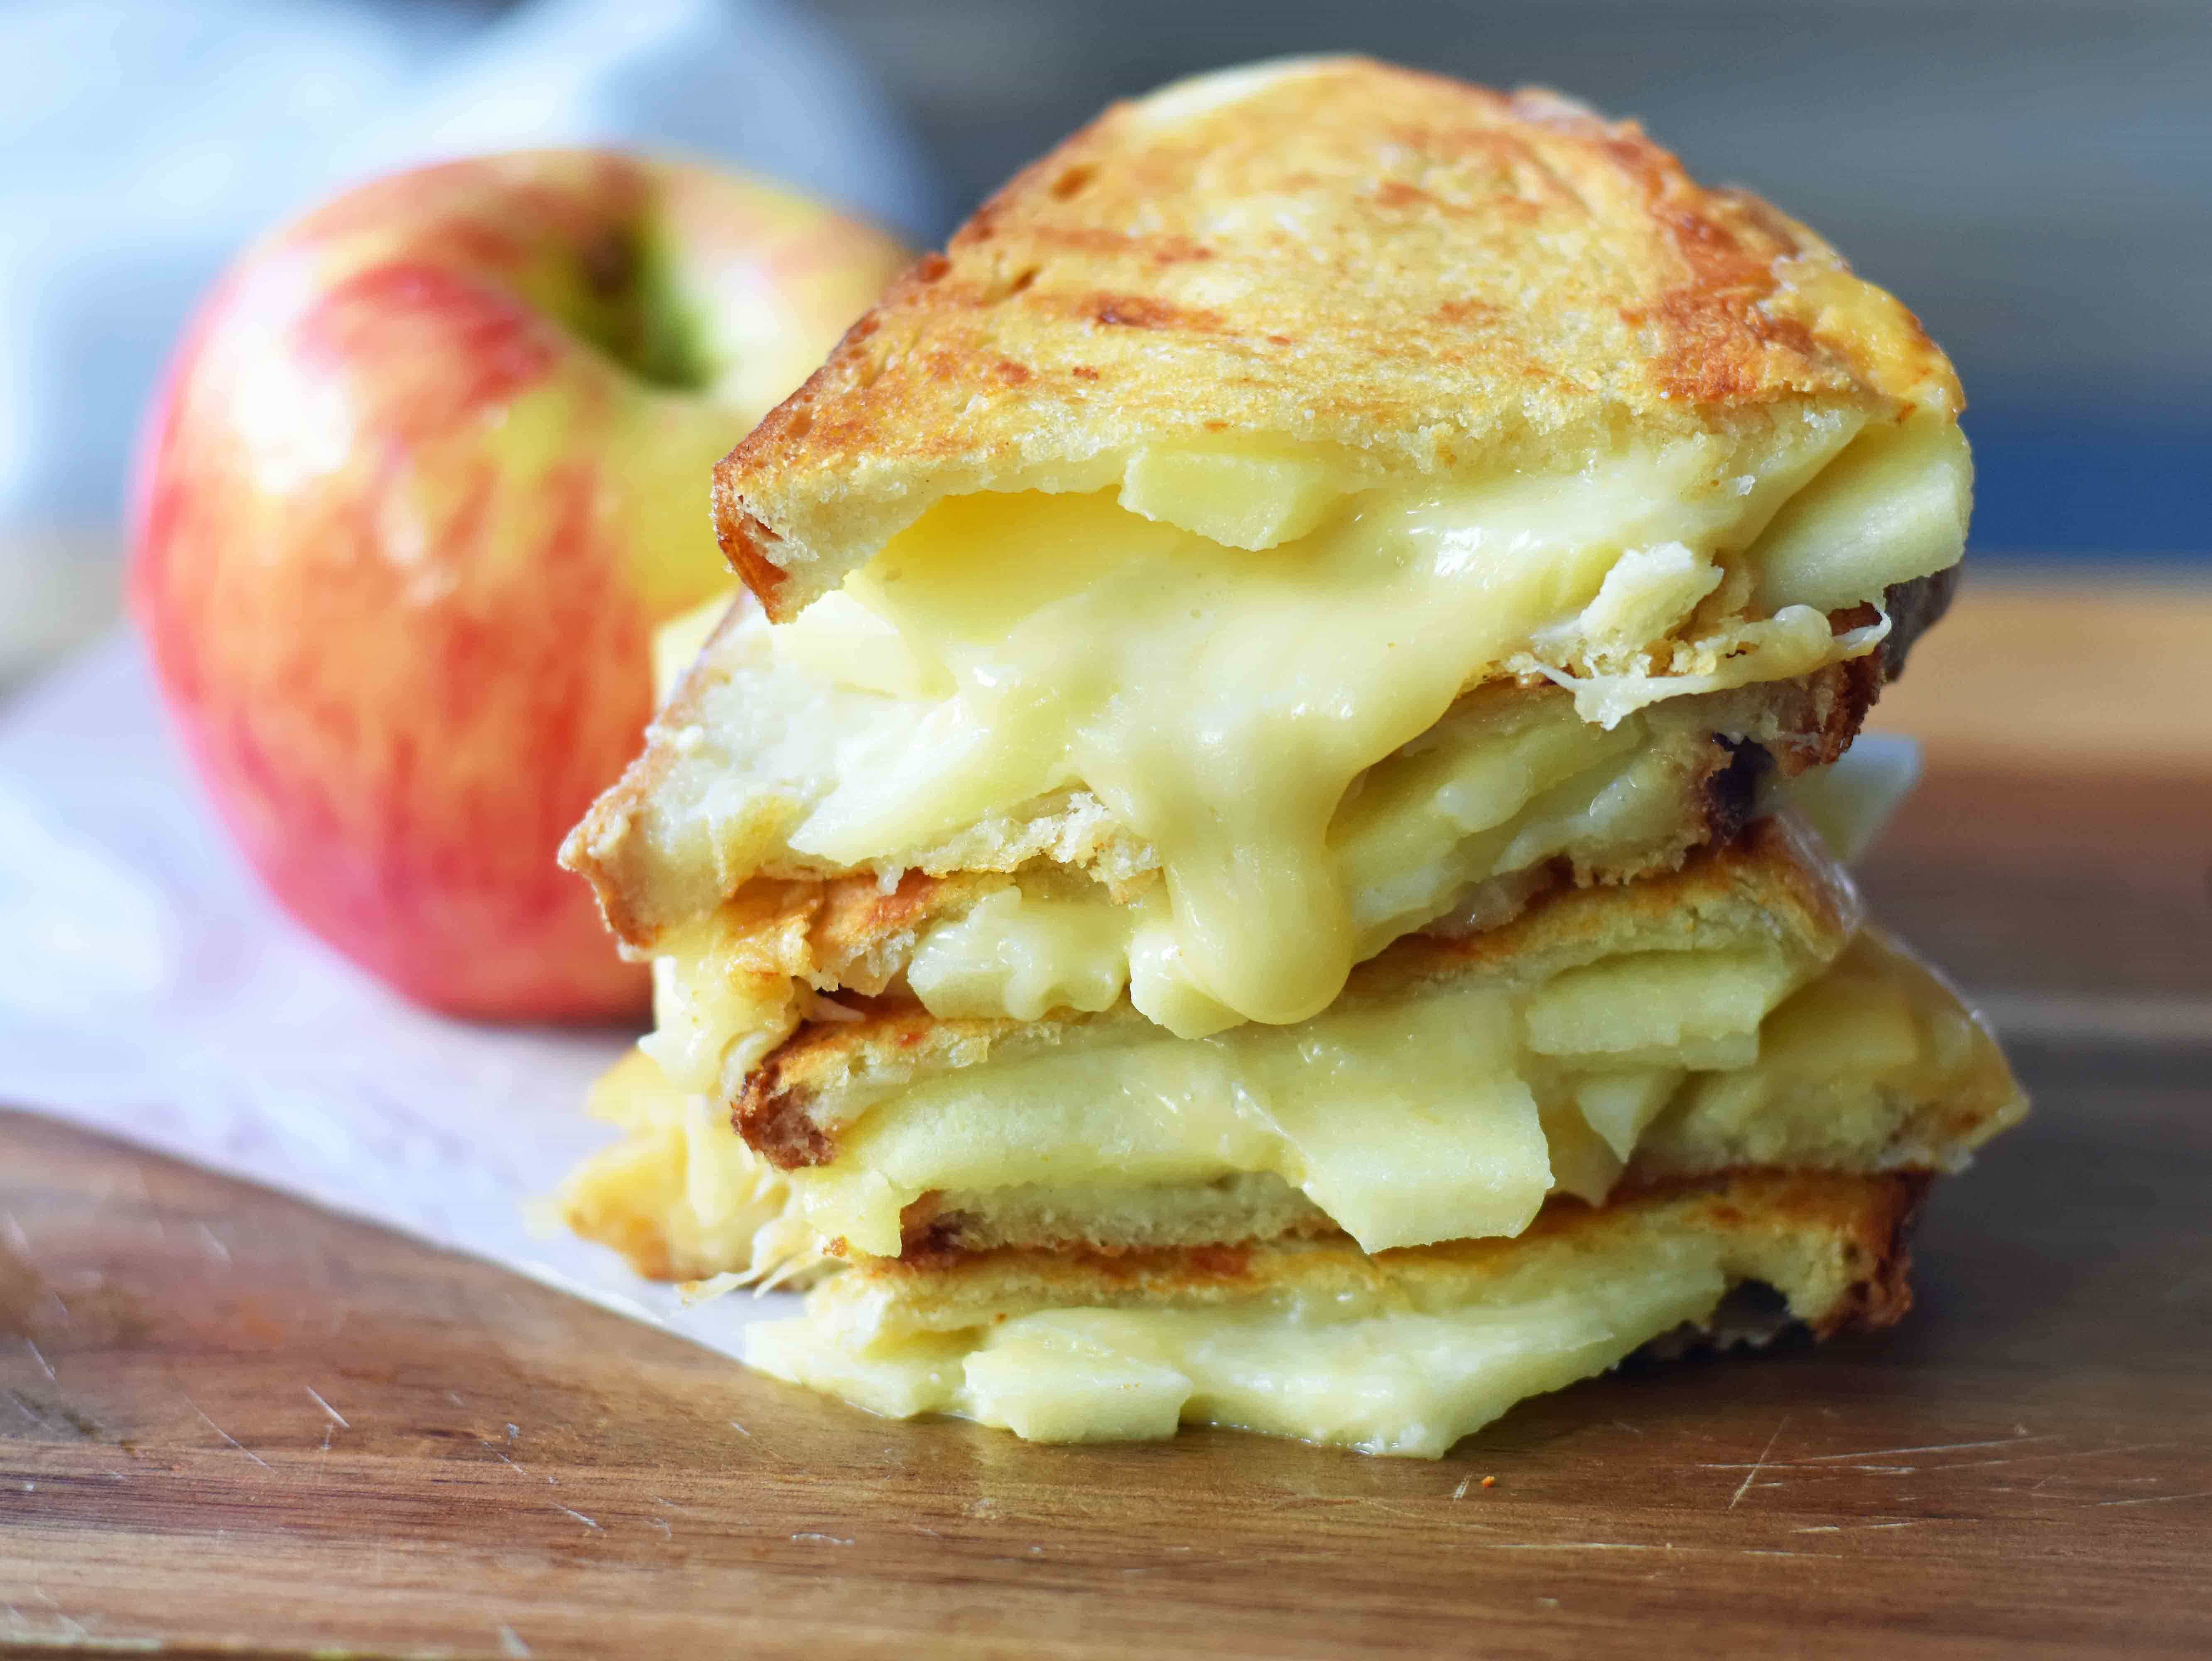 A gourmet grilled cheese sandwich made with smoked gouda cheese, sweet crisp Honeycrisp apple slices, all on sourdough bread. How to make the perfect grilled cheese sandwich. Tips on how to make the best grilled cheese. www.modernhoney.com